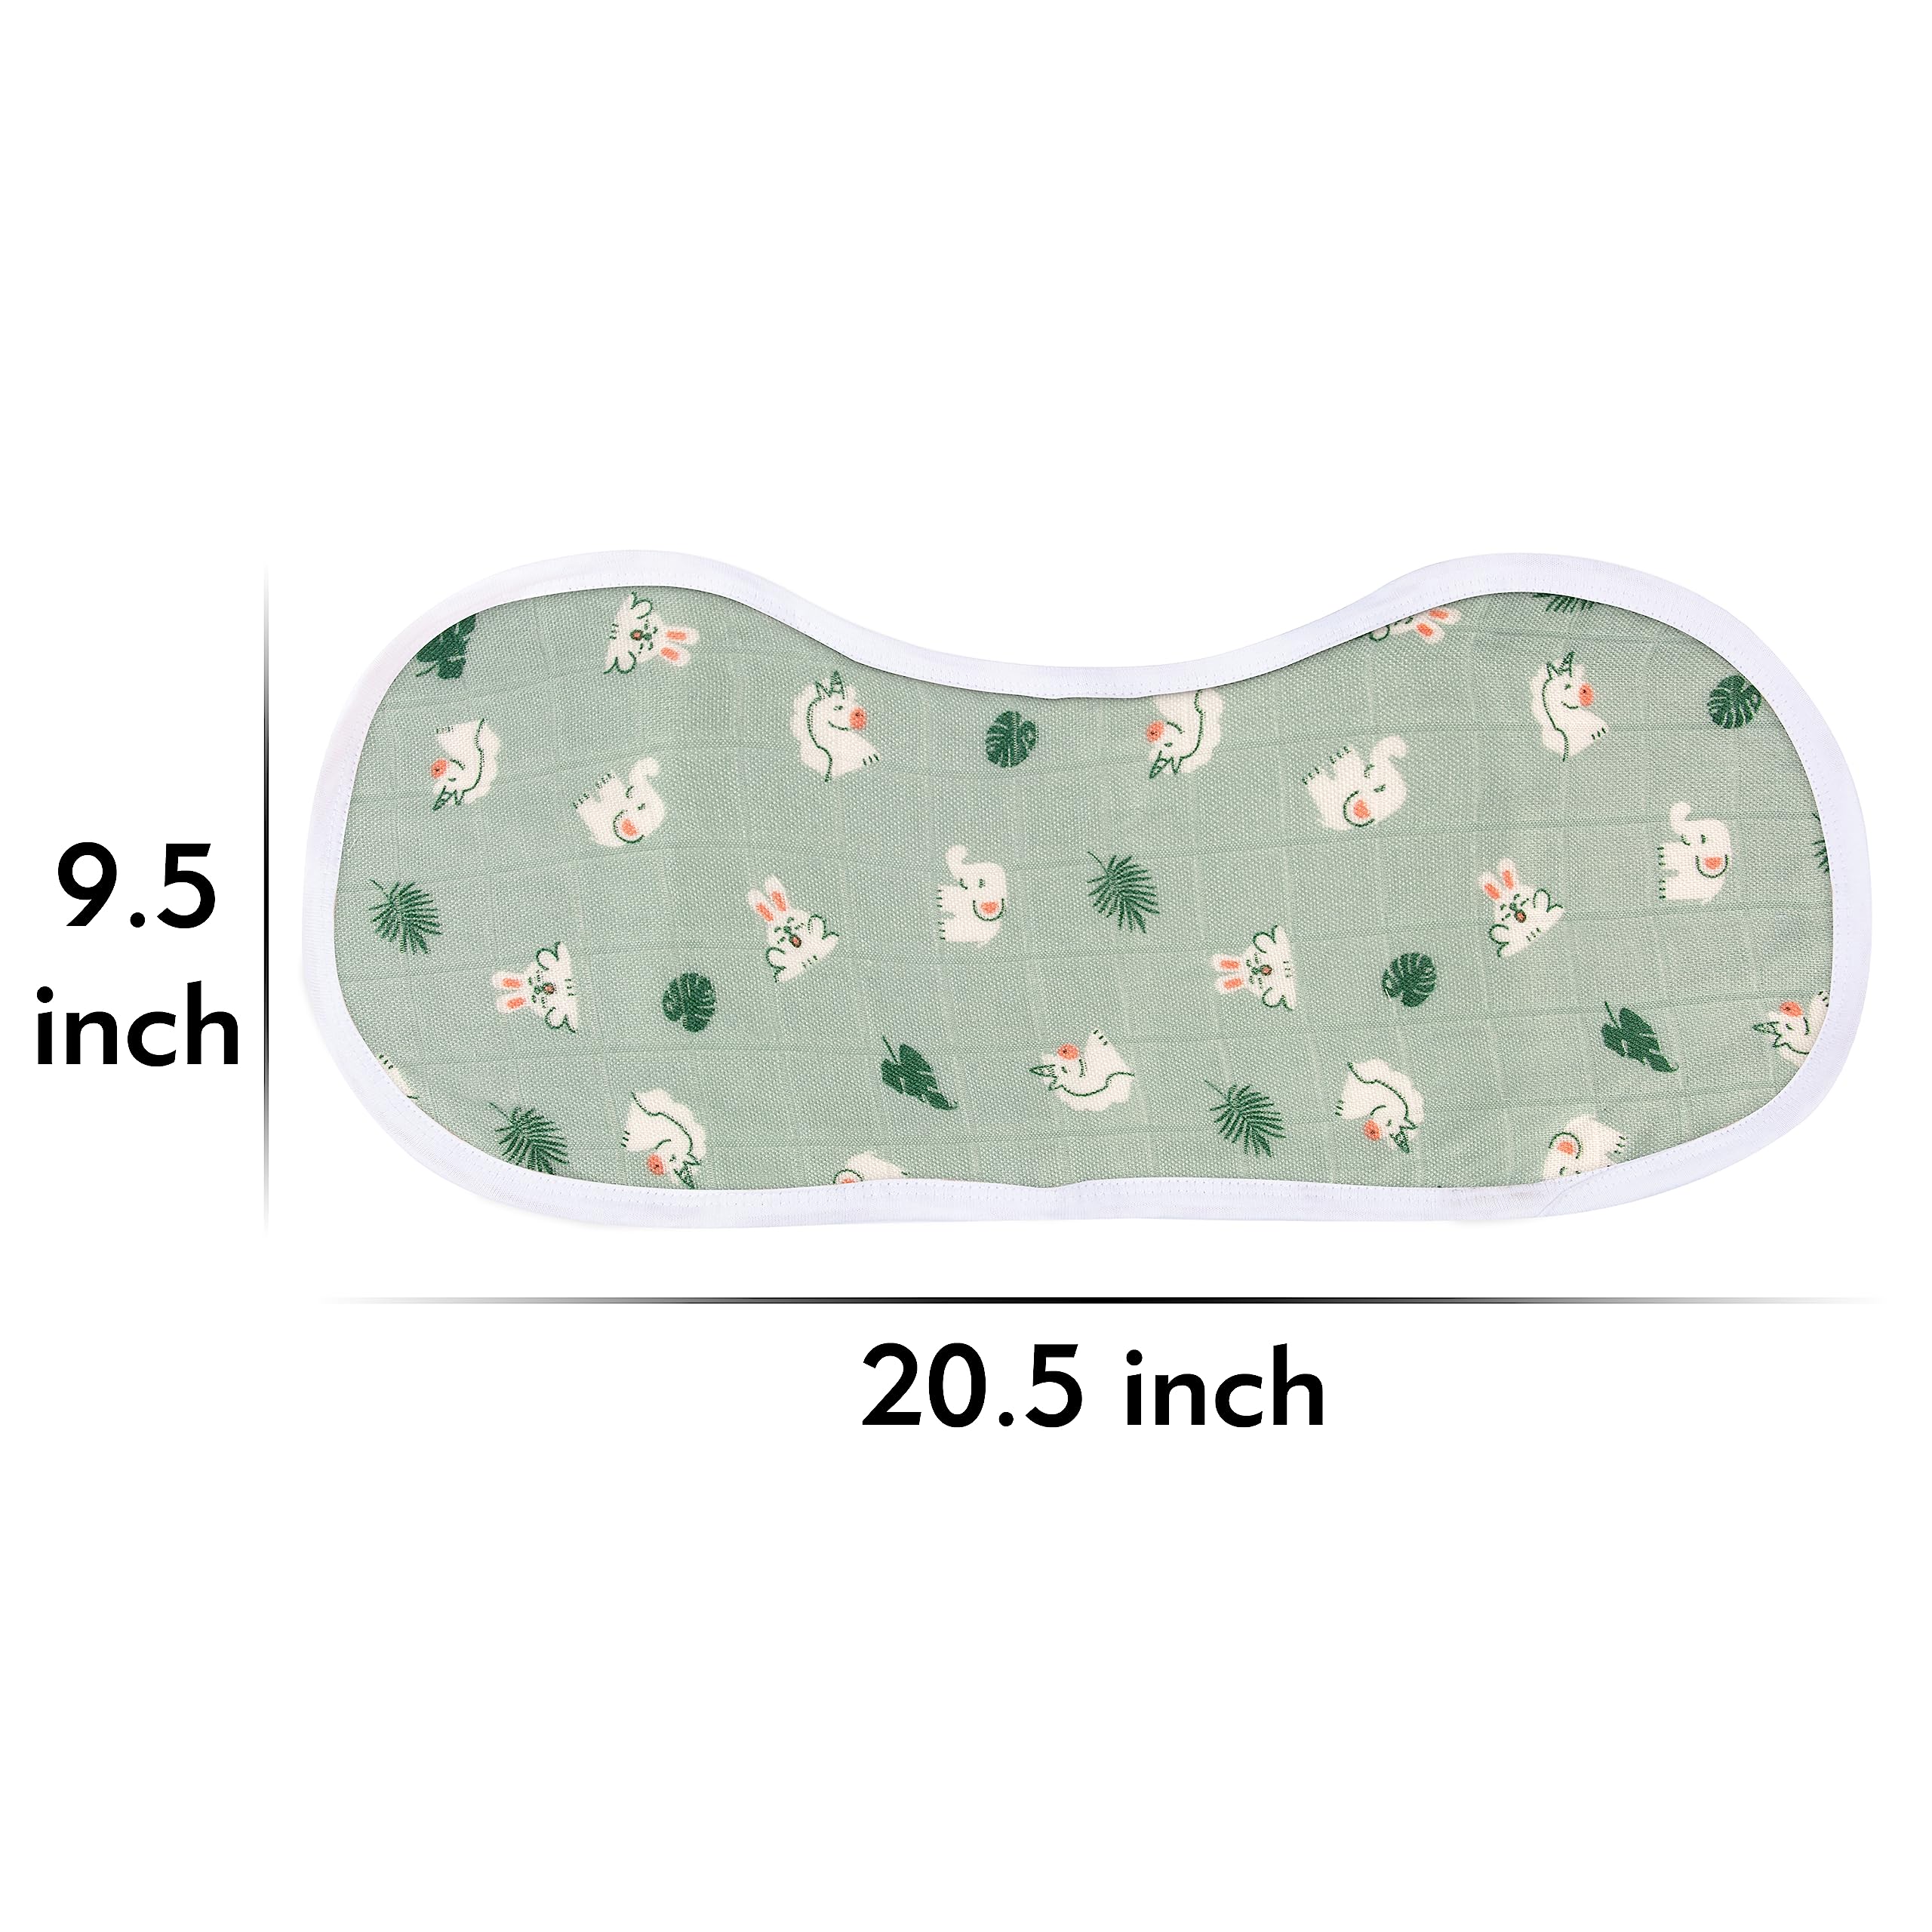 Mush Super Soft 100% Bamboo Terry Washcloth/Reusable Baby Wipes/Baby Towel for New Born || 500 GSM || Absorbent, Anti-Microbial, Sensitive Skin Friendly. (2, Geo Mustard, Rabbit Green)